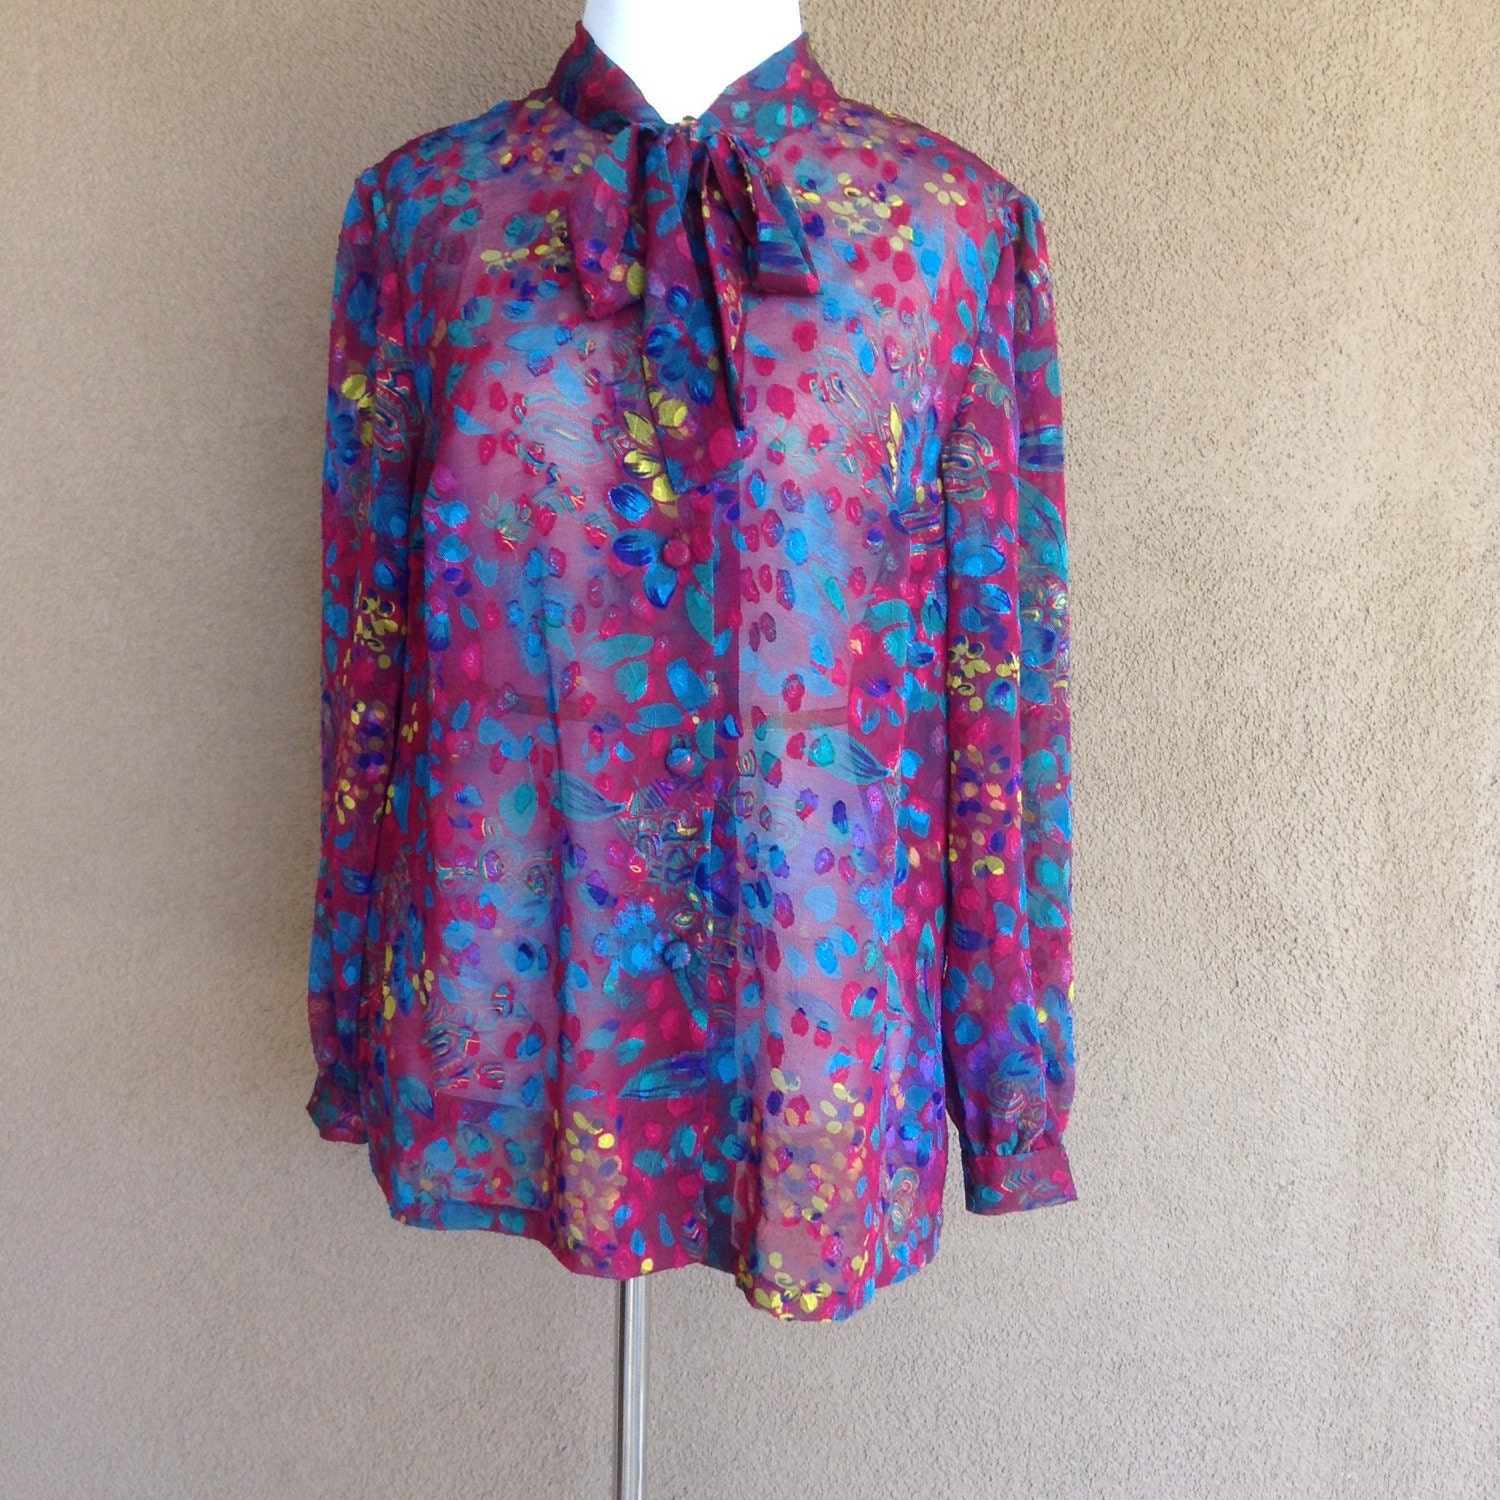 1970s Printed Blouse with Fabric Buttons and by MayorBearVintage